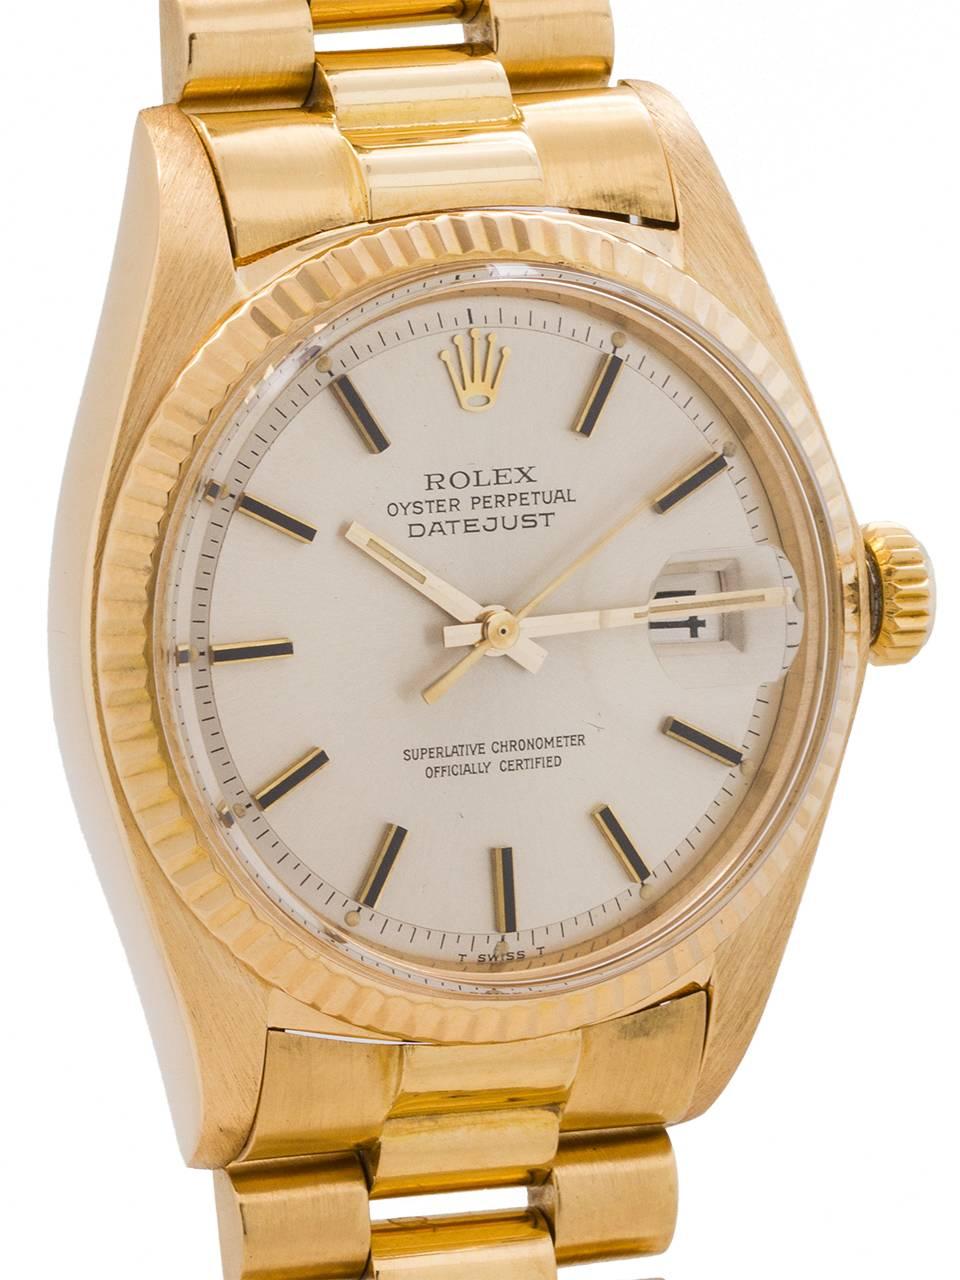 
Vintage Rolex 18K YG Datejust ref# 1601 serial number 3.4 million circa 1972. Featuring a 36mm diameter Oyster case with fluted bezel, acrylic crystal and signed screw down crown. With exceptionally clean, original silver satin dial with applied